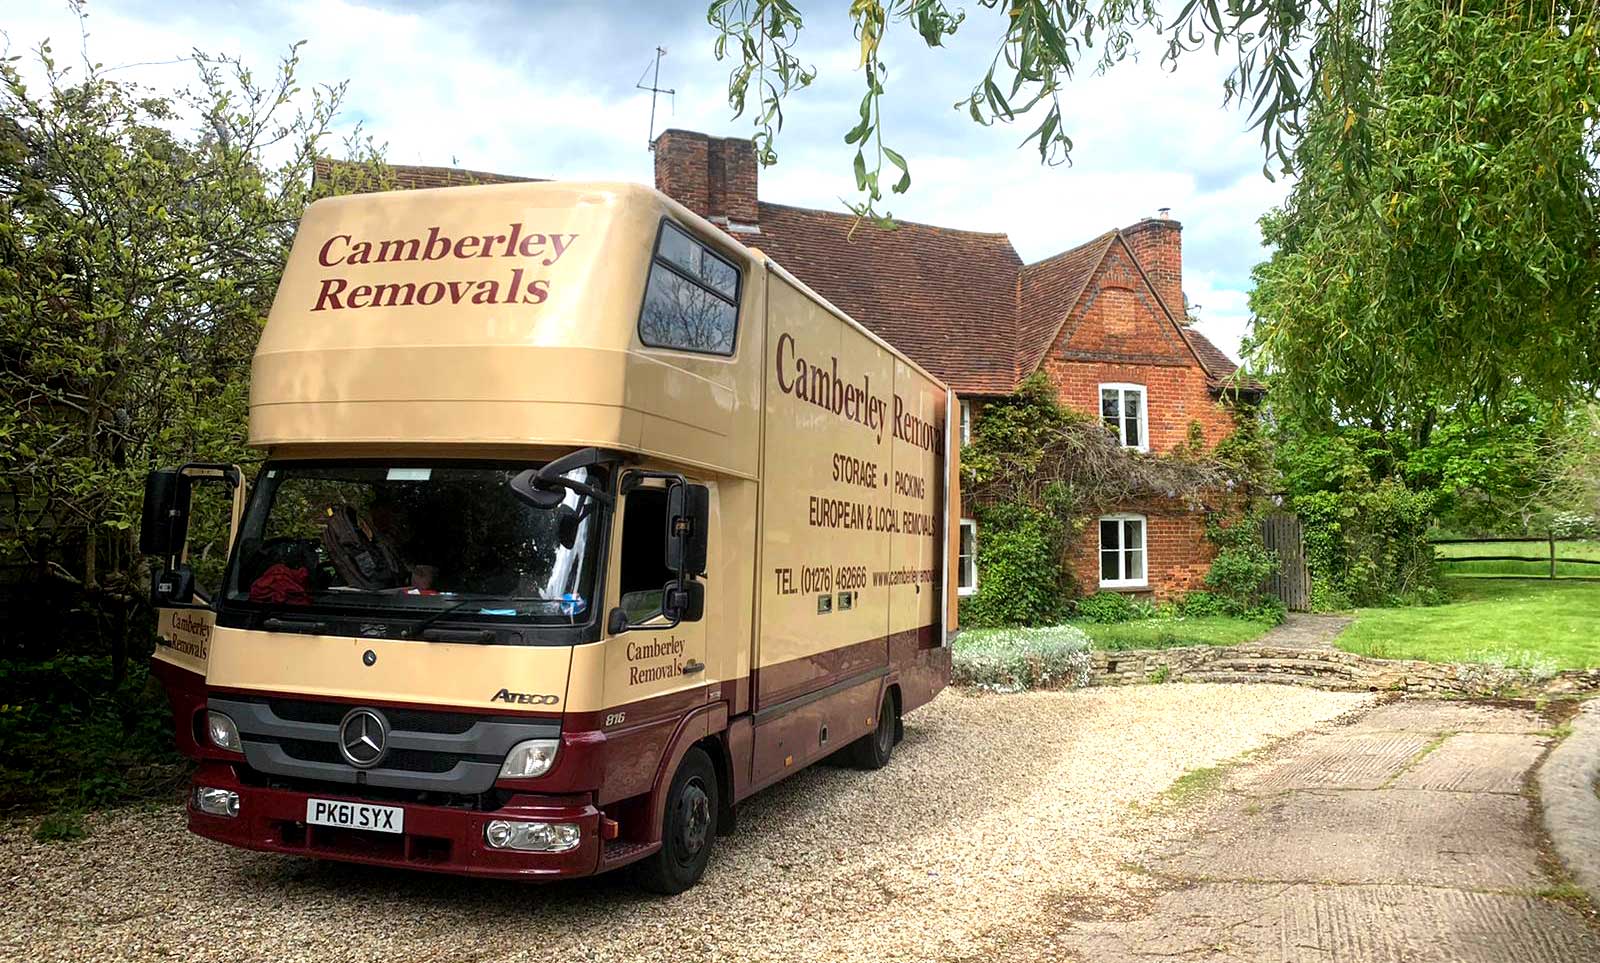 Camberley Removals & Storage lorry at country house